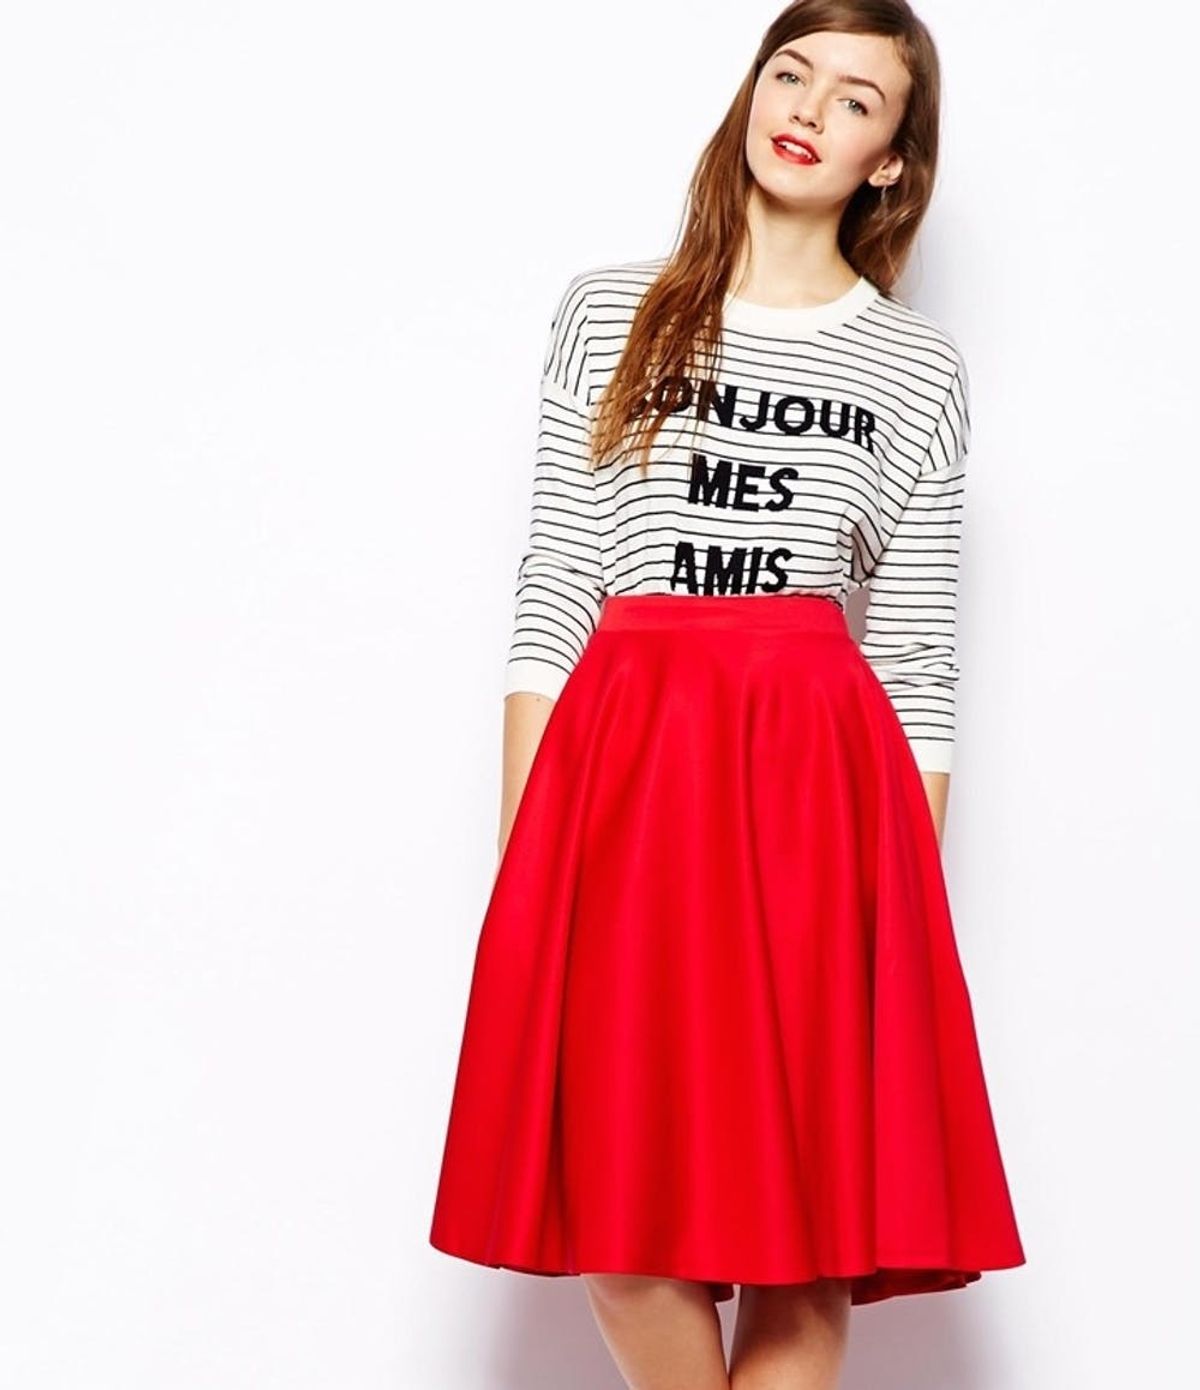 10 of the Most Stylish Midi Skirts for Spring